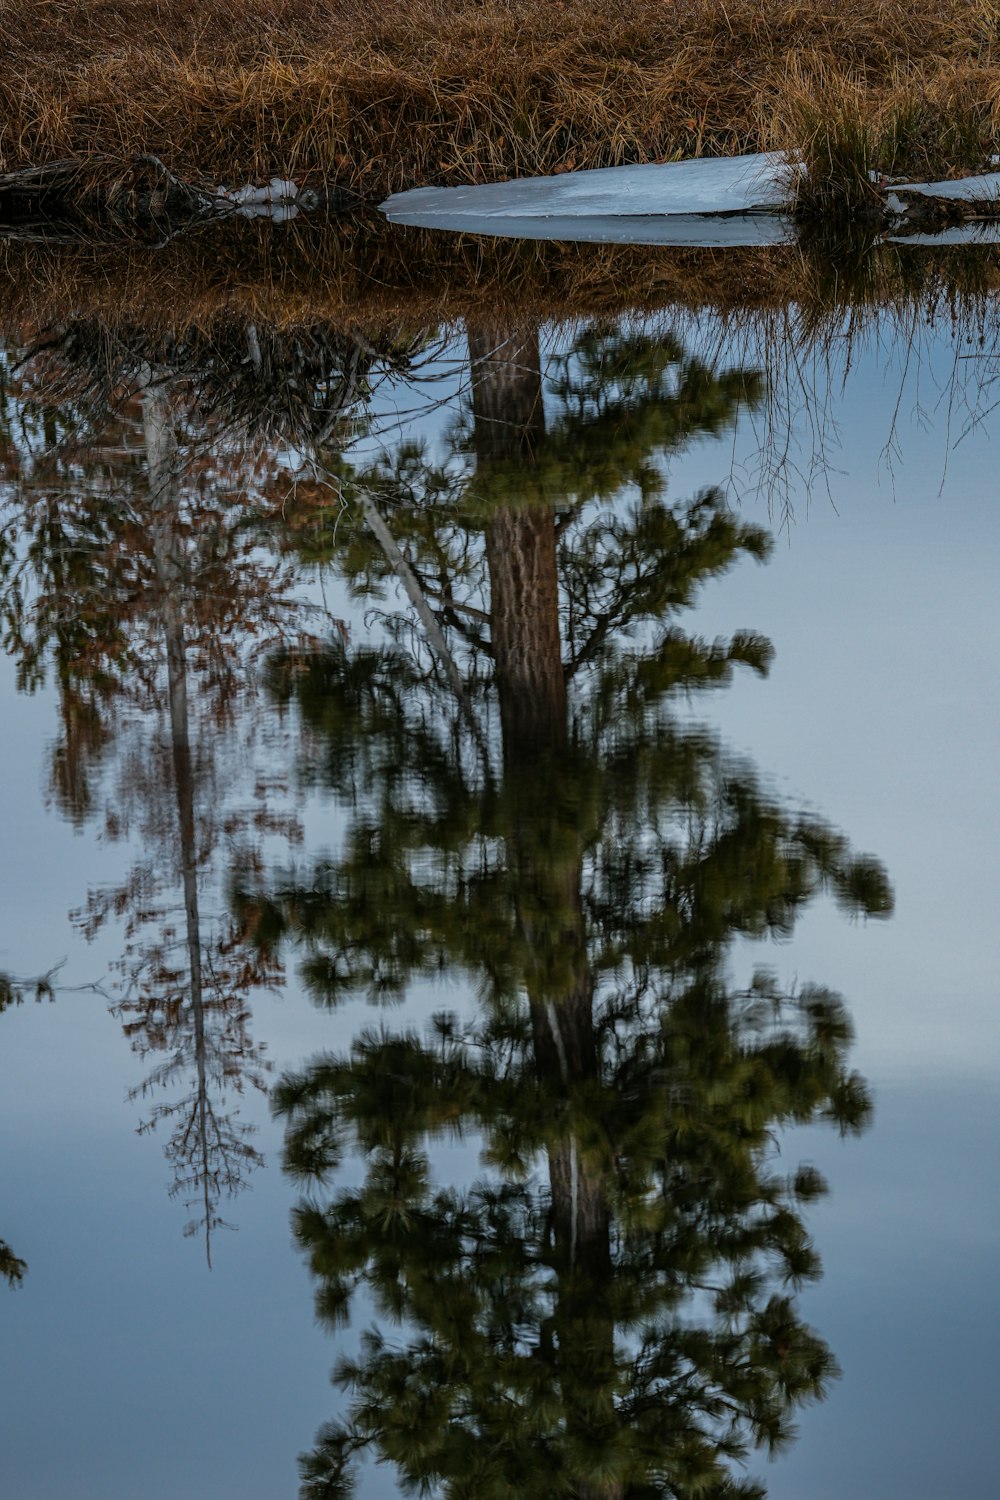 a reflection of a tree in a body of water